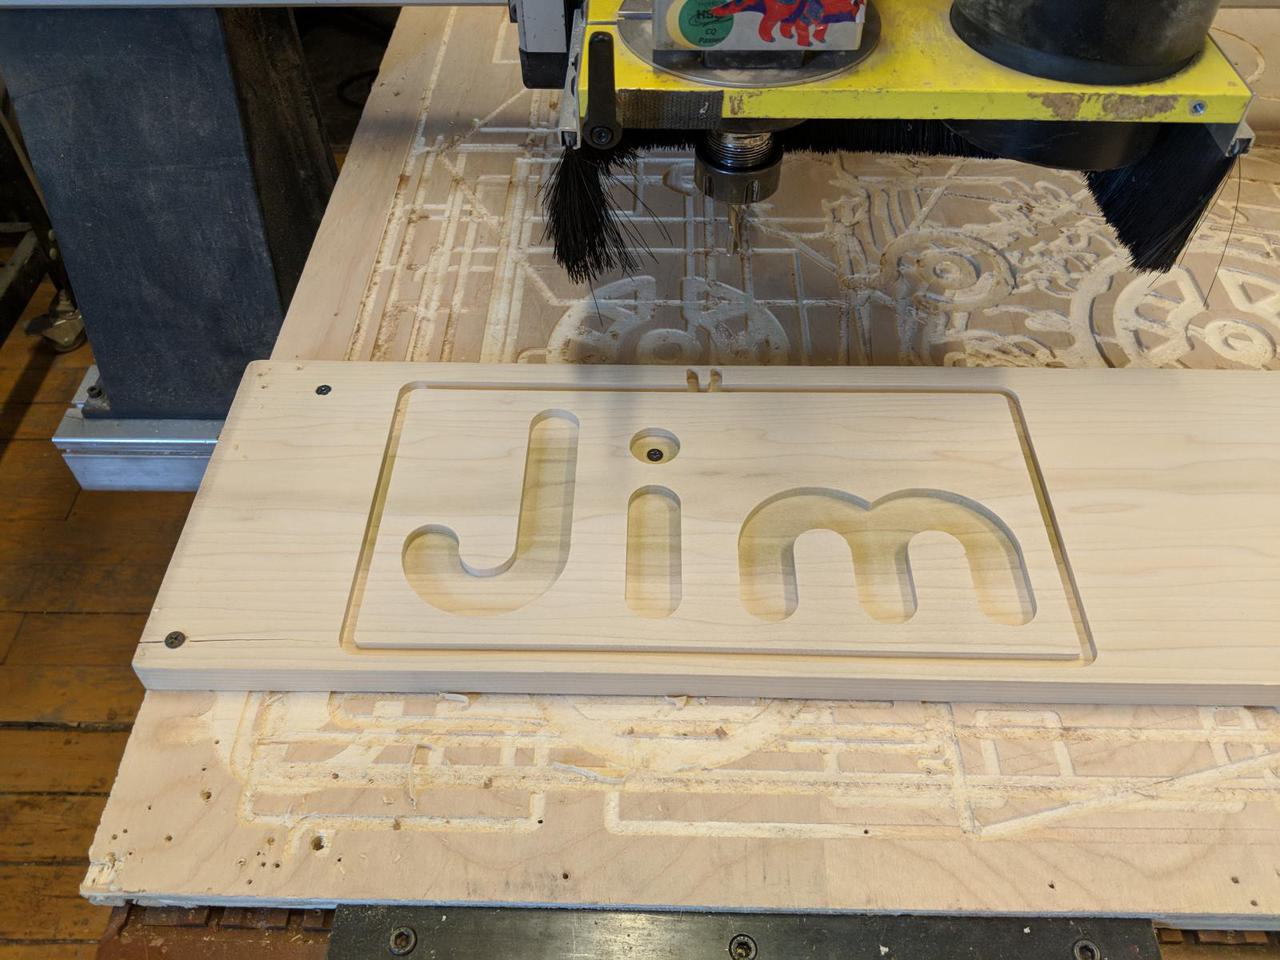 wood attached to CNC bed with the letters J I M carved into it. The CNC bit is hovering above it.